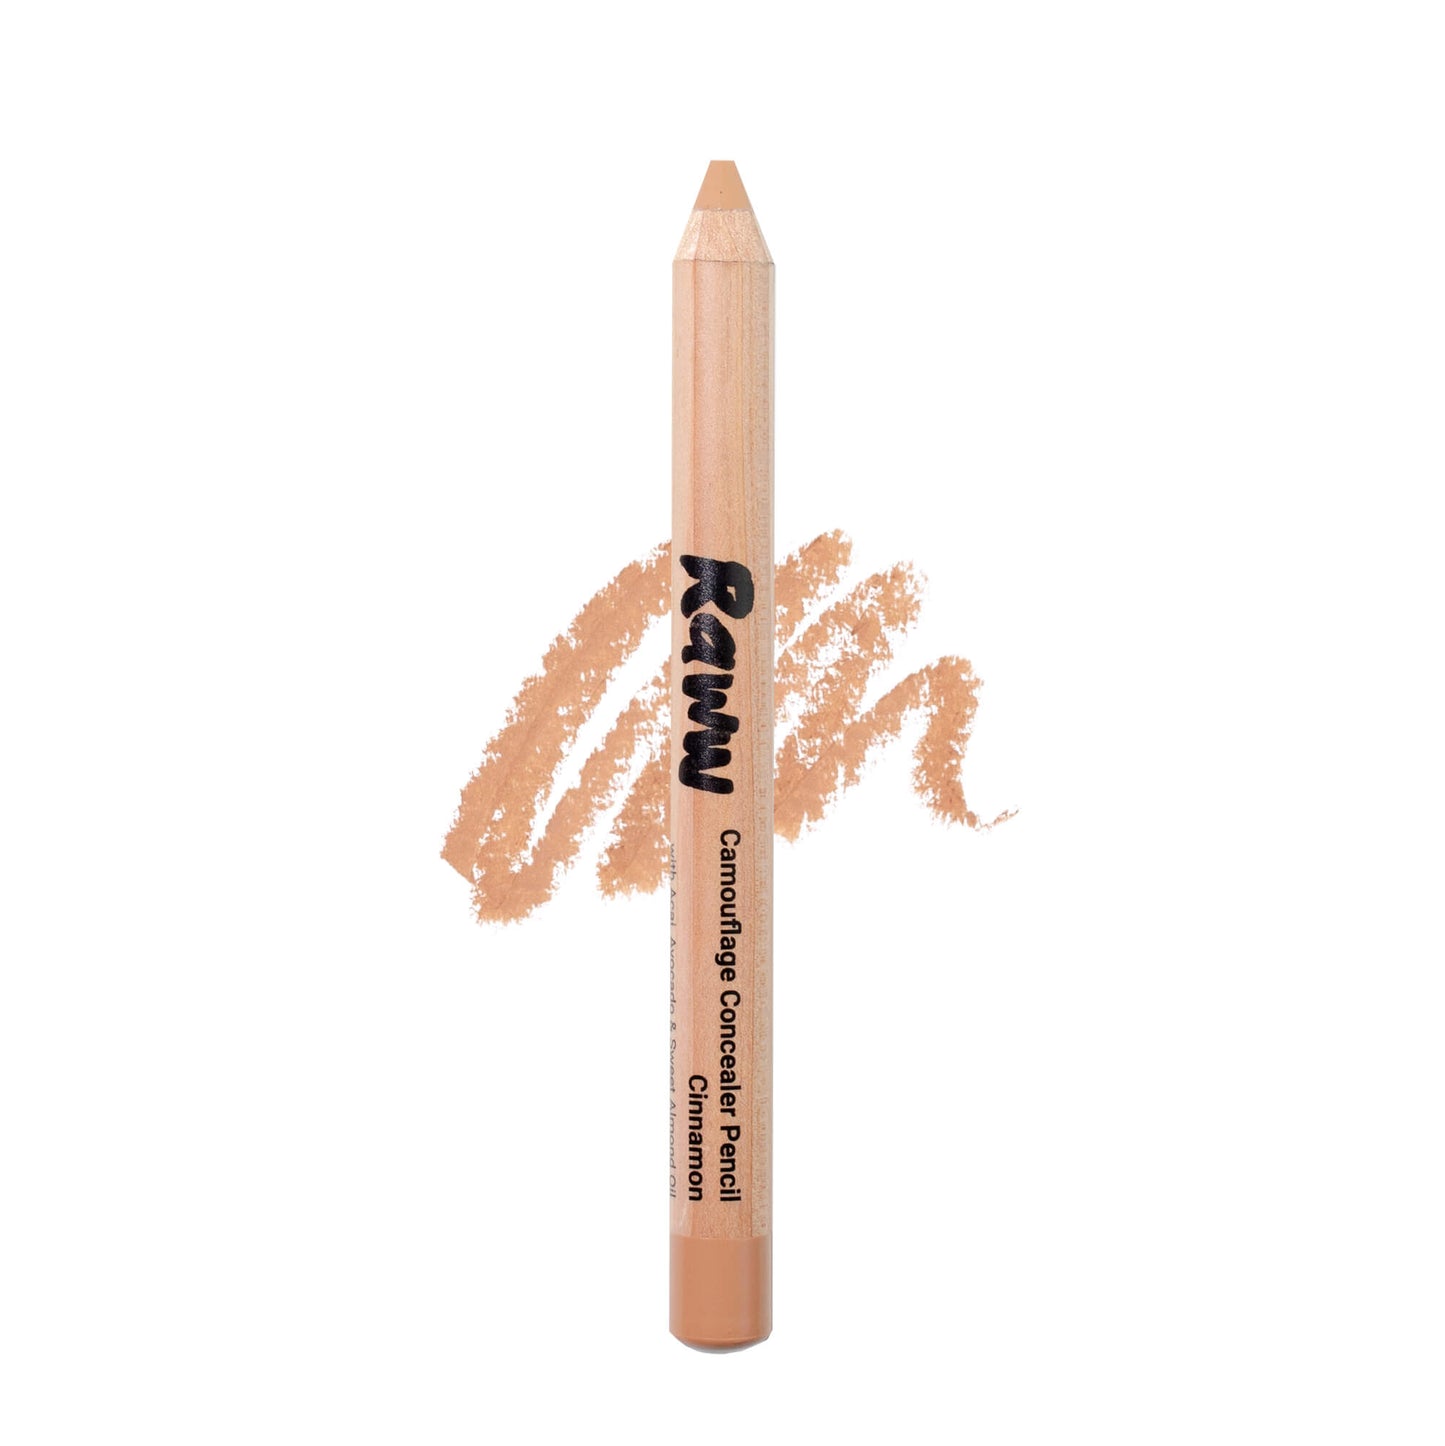 Camouflage Concealer Pencil (Cinnamon) | RAWW Cosmetics | Product + Swatch